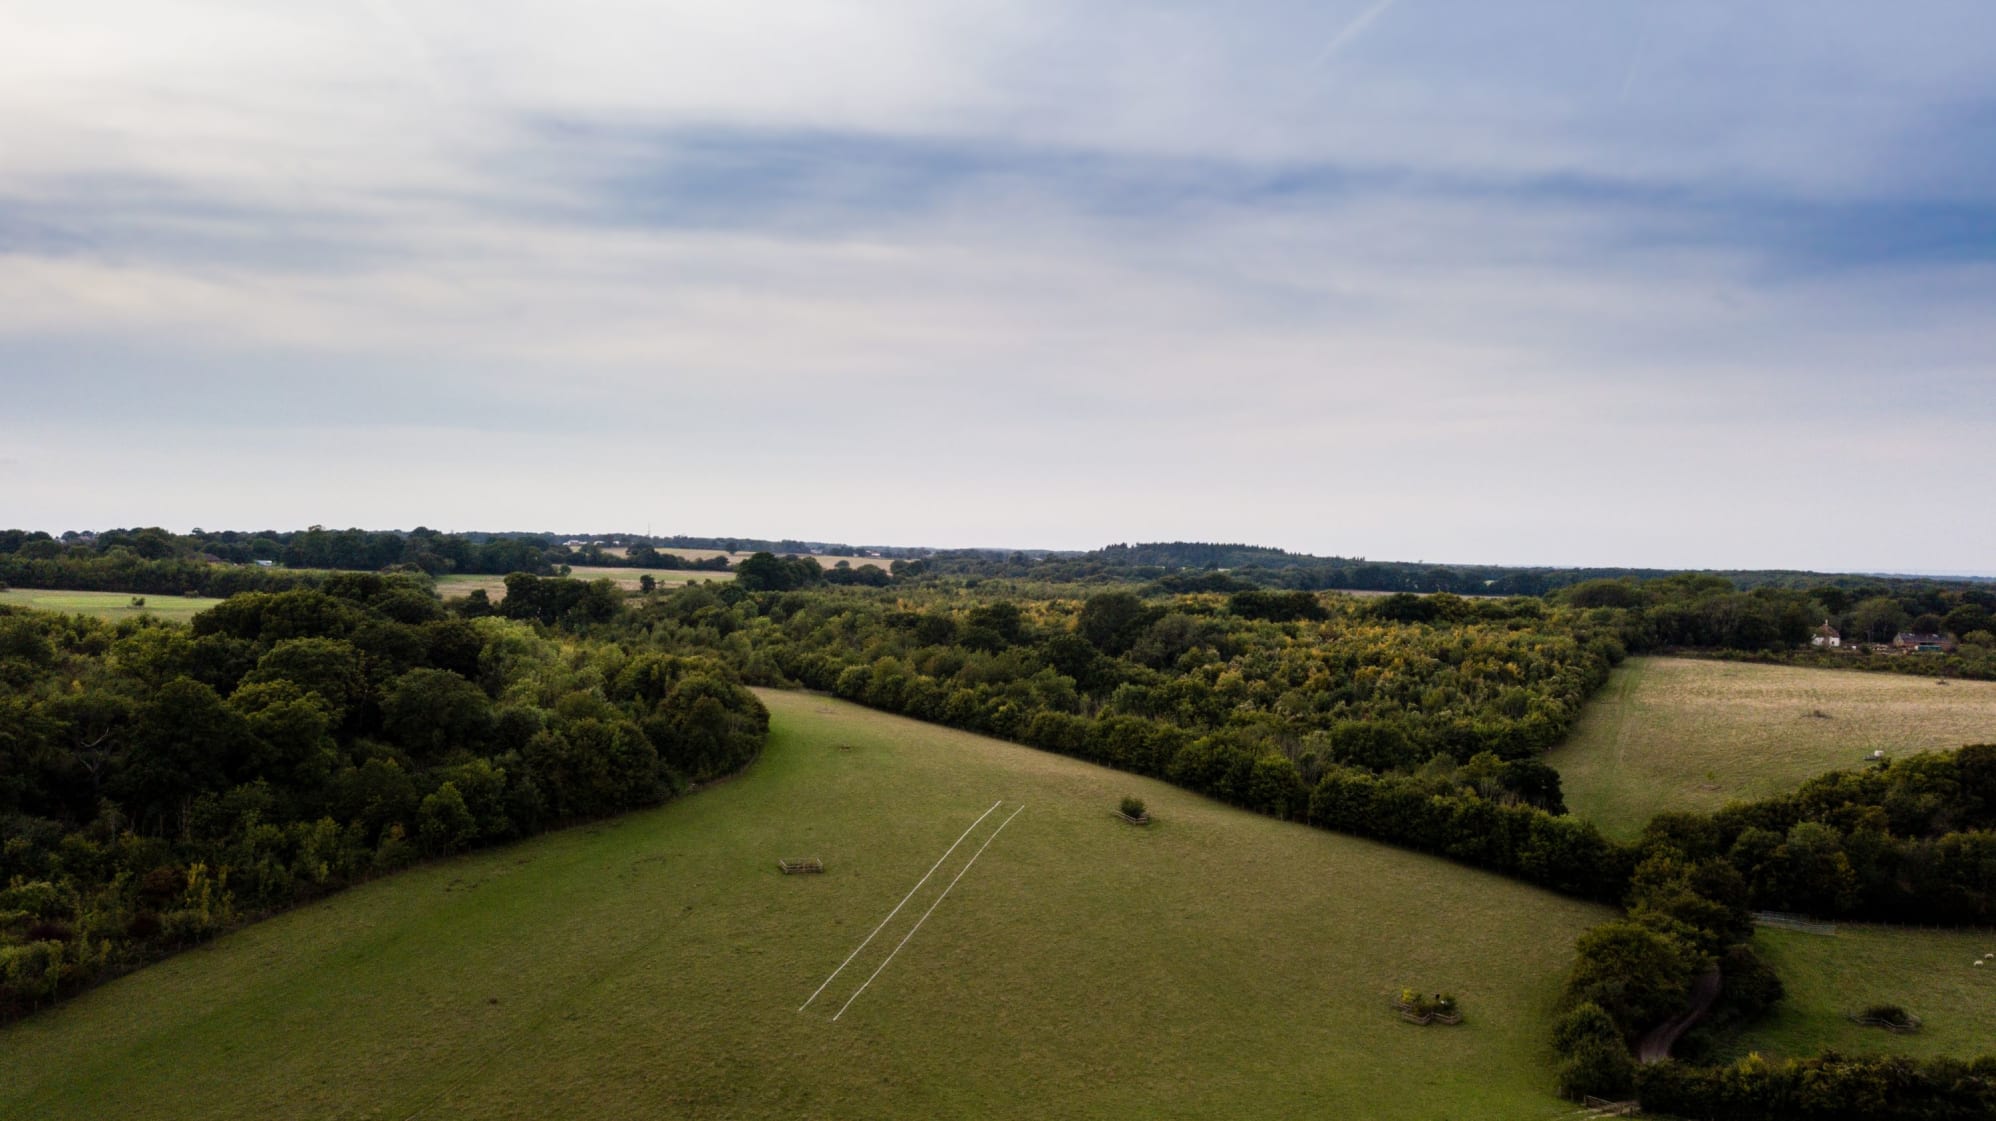 Aerial photograph of Annes artwork in its landscape. An expanse of green fields stretch out away from the camera. The sky blue and cloudy. On the cleared field below, are two white chalk lines placed in the grass.